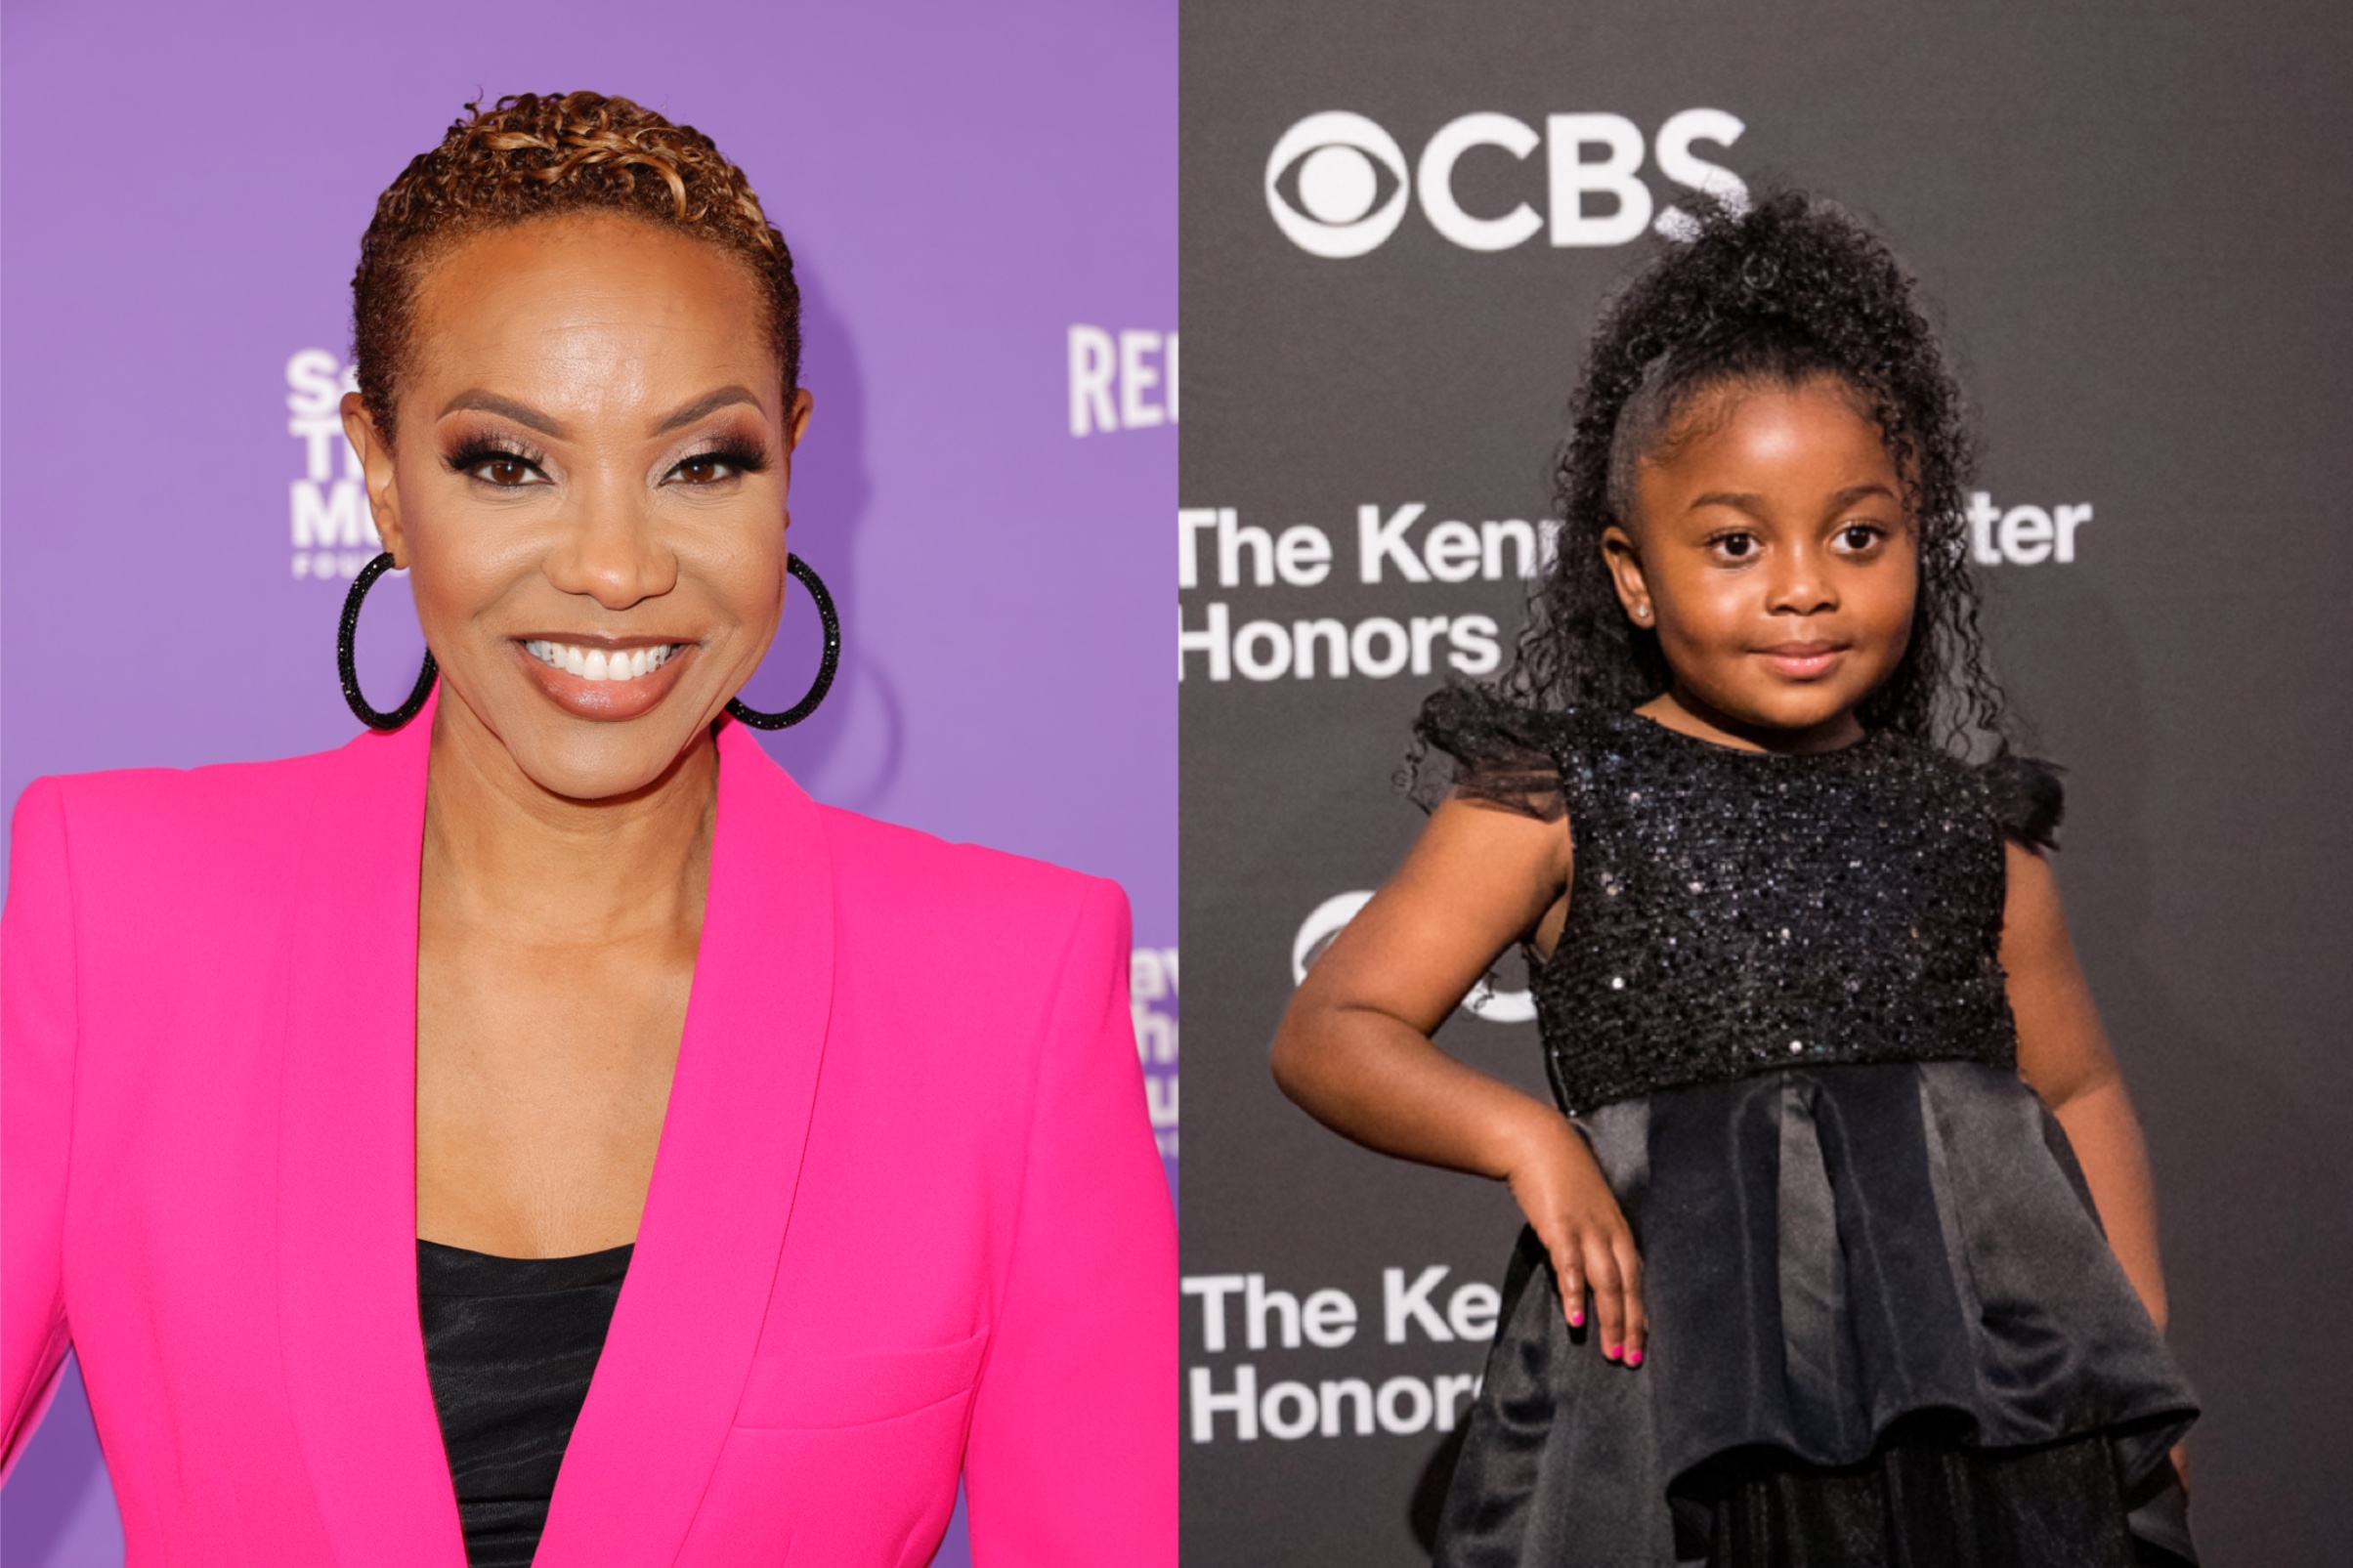 5-Year-Old Viral Sensation Gets Stamp Of Approval From MC Lyte #MCLyte